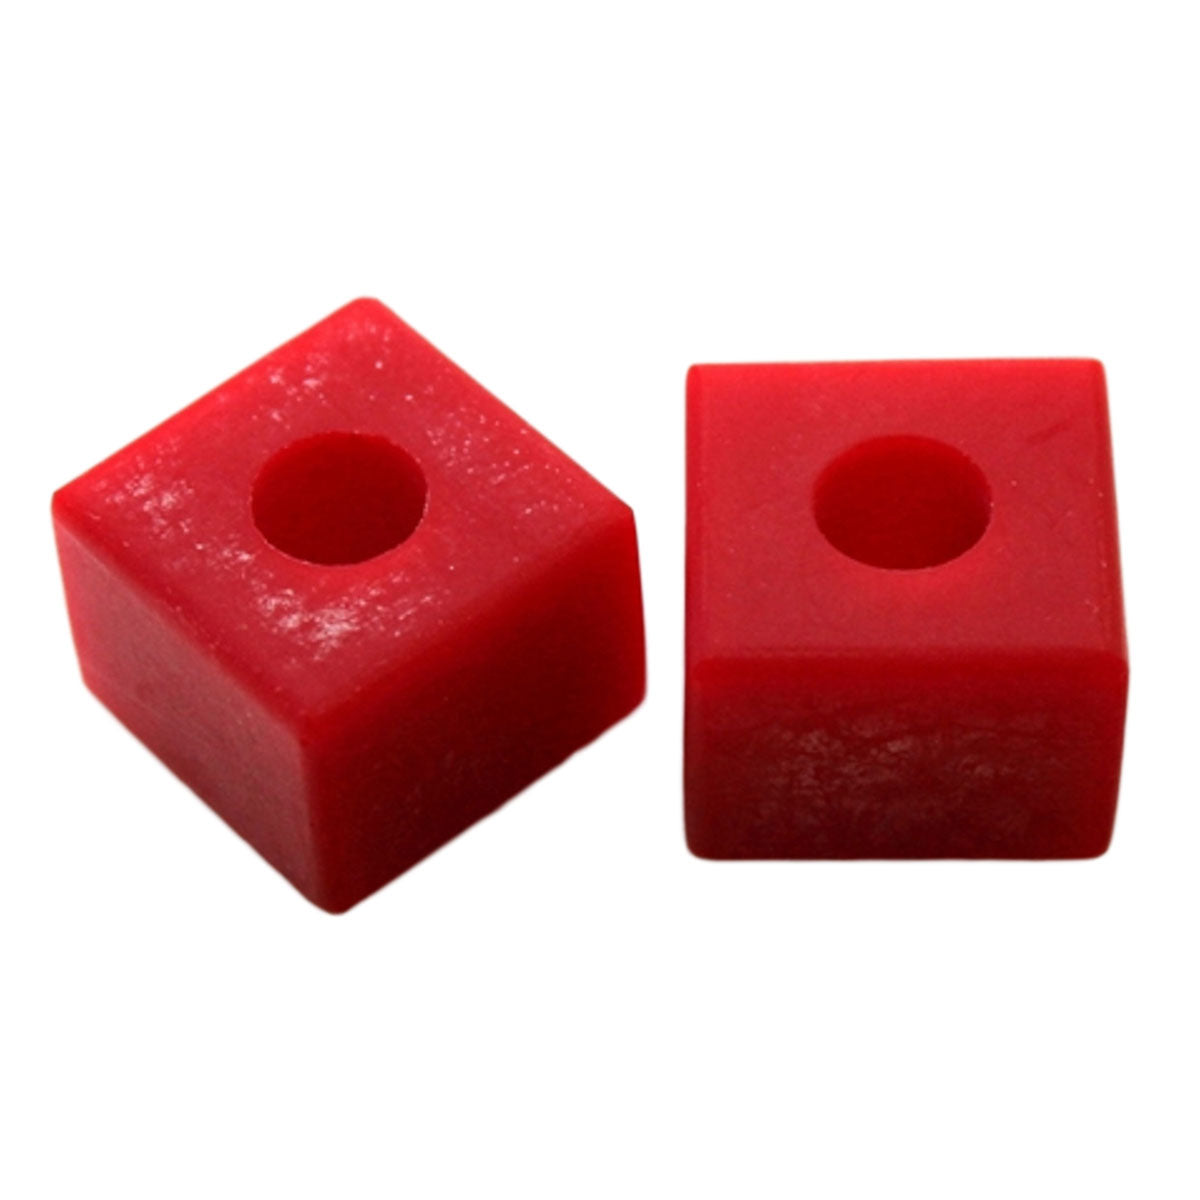 RipTide CUBE 93a WFB Bushings - Red image 1